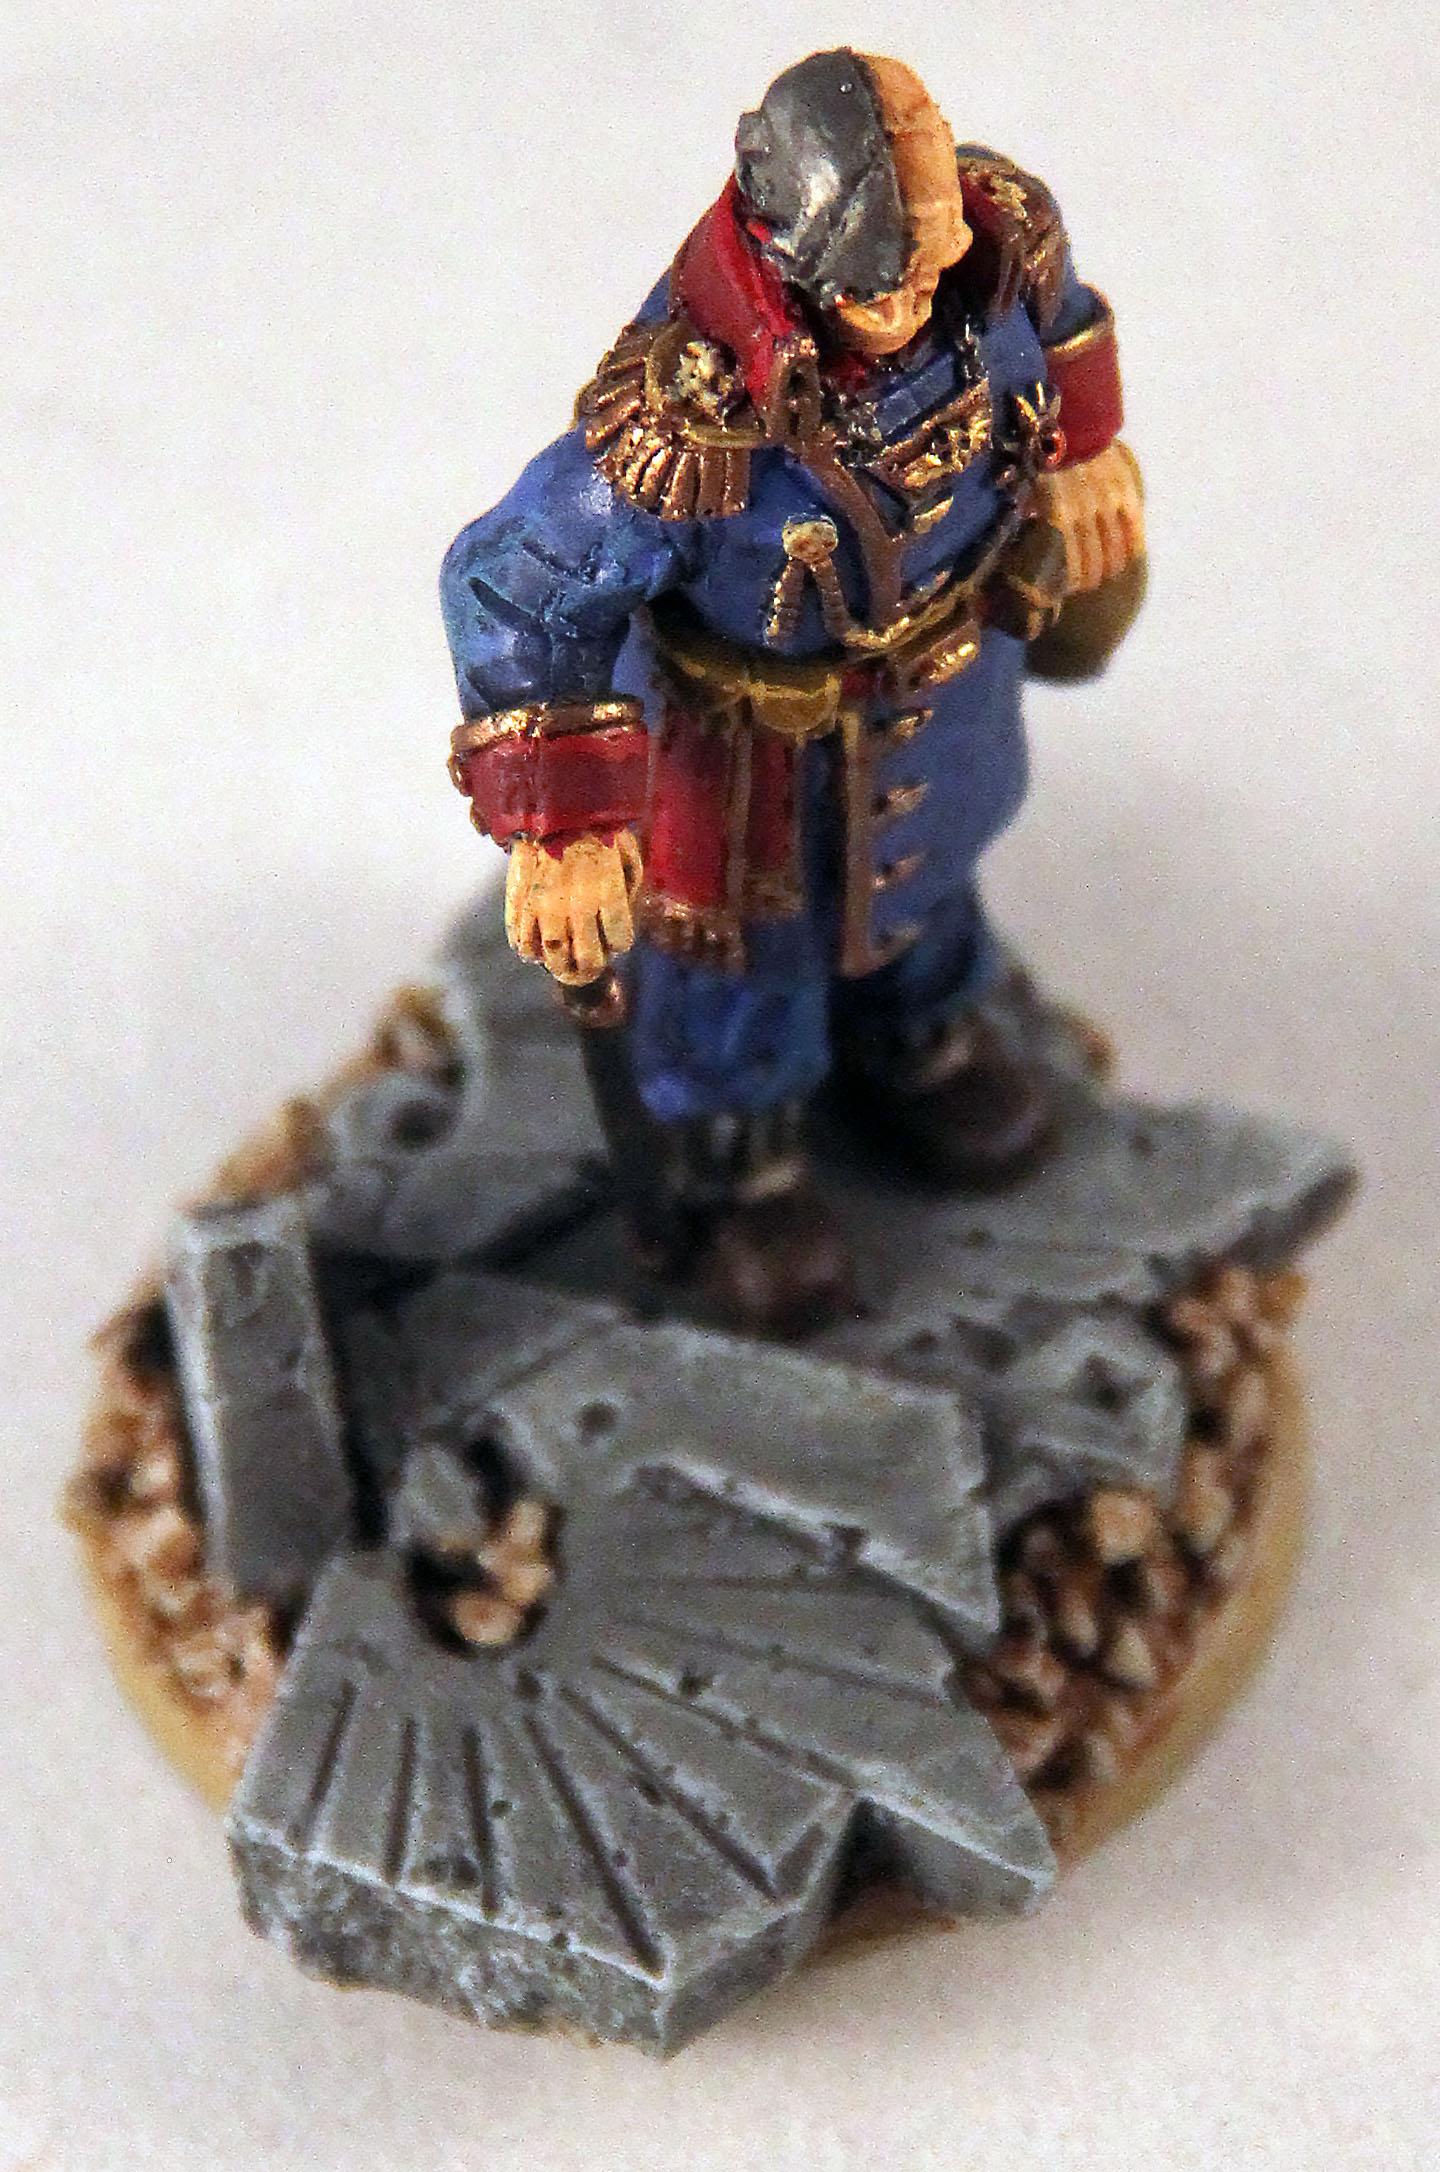 54mm, Imperial Officer, Inquisitor, Warhammer 40,000